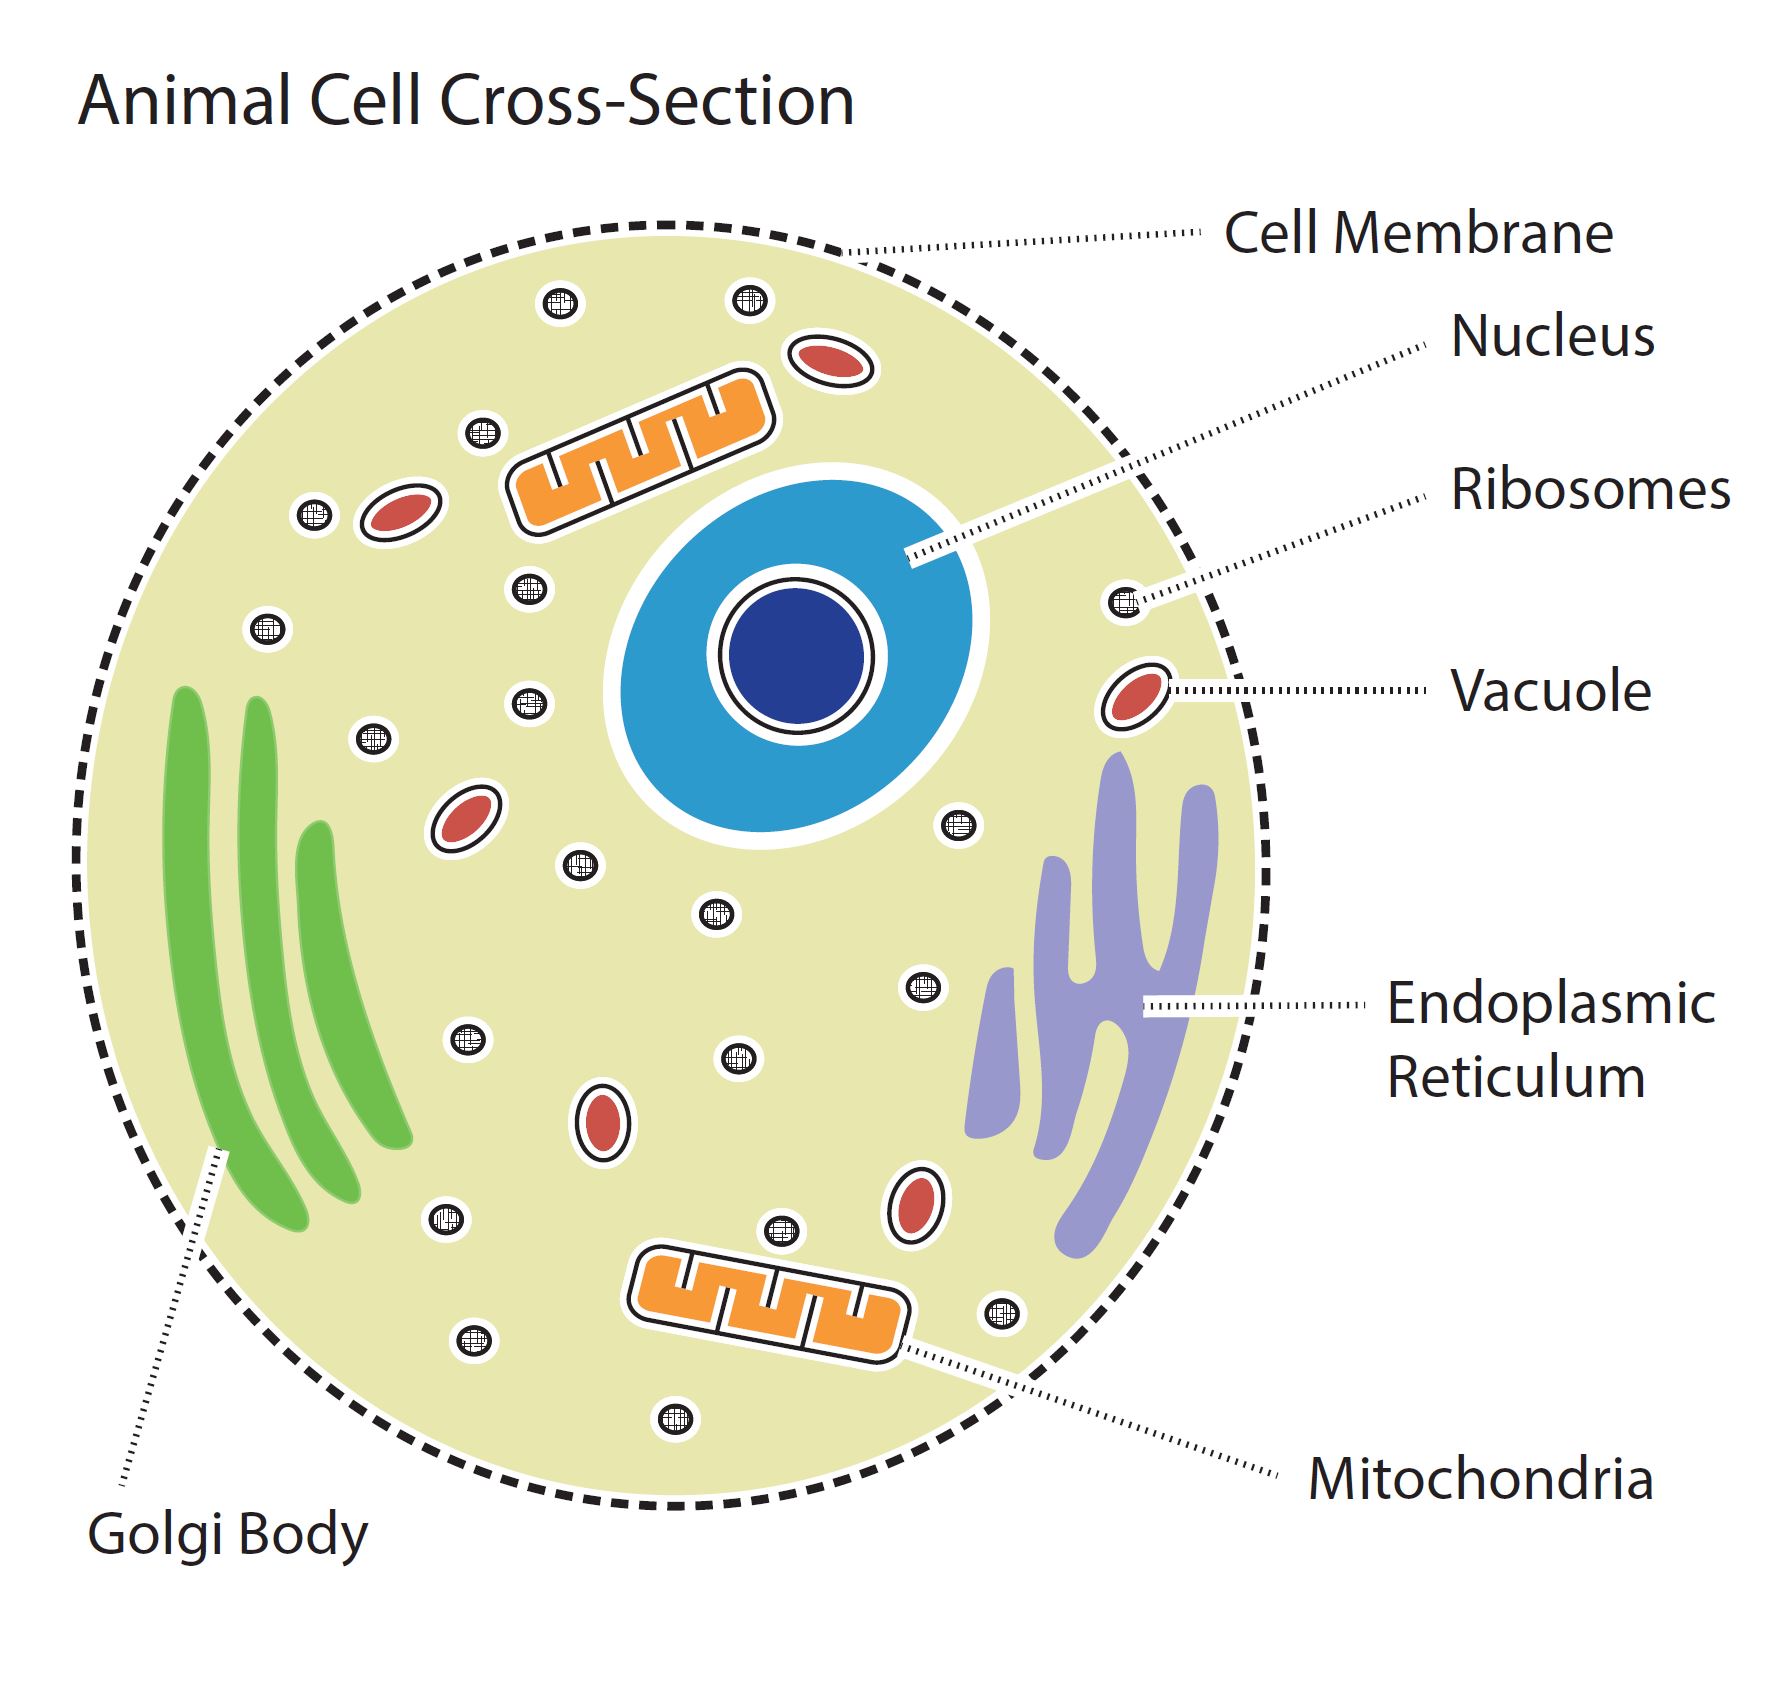 Illustration showing the cross-section of an animal cell. The diagram includes the outer cell membrane and nucleus at the center with ribosomes, vacuole, endoplasmic reticulum, mitochondria, and golgi body embedded in the cytoplasm. 